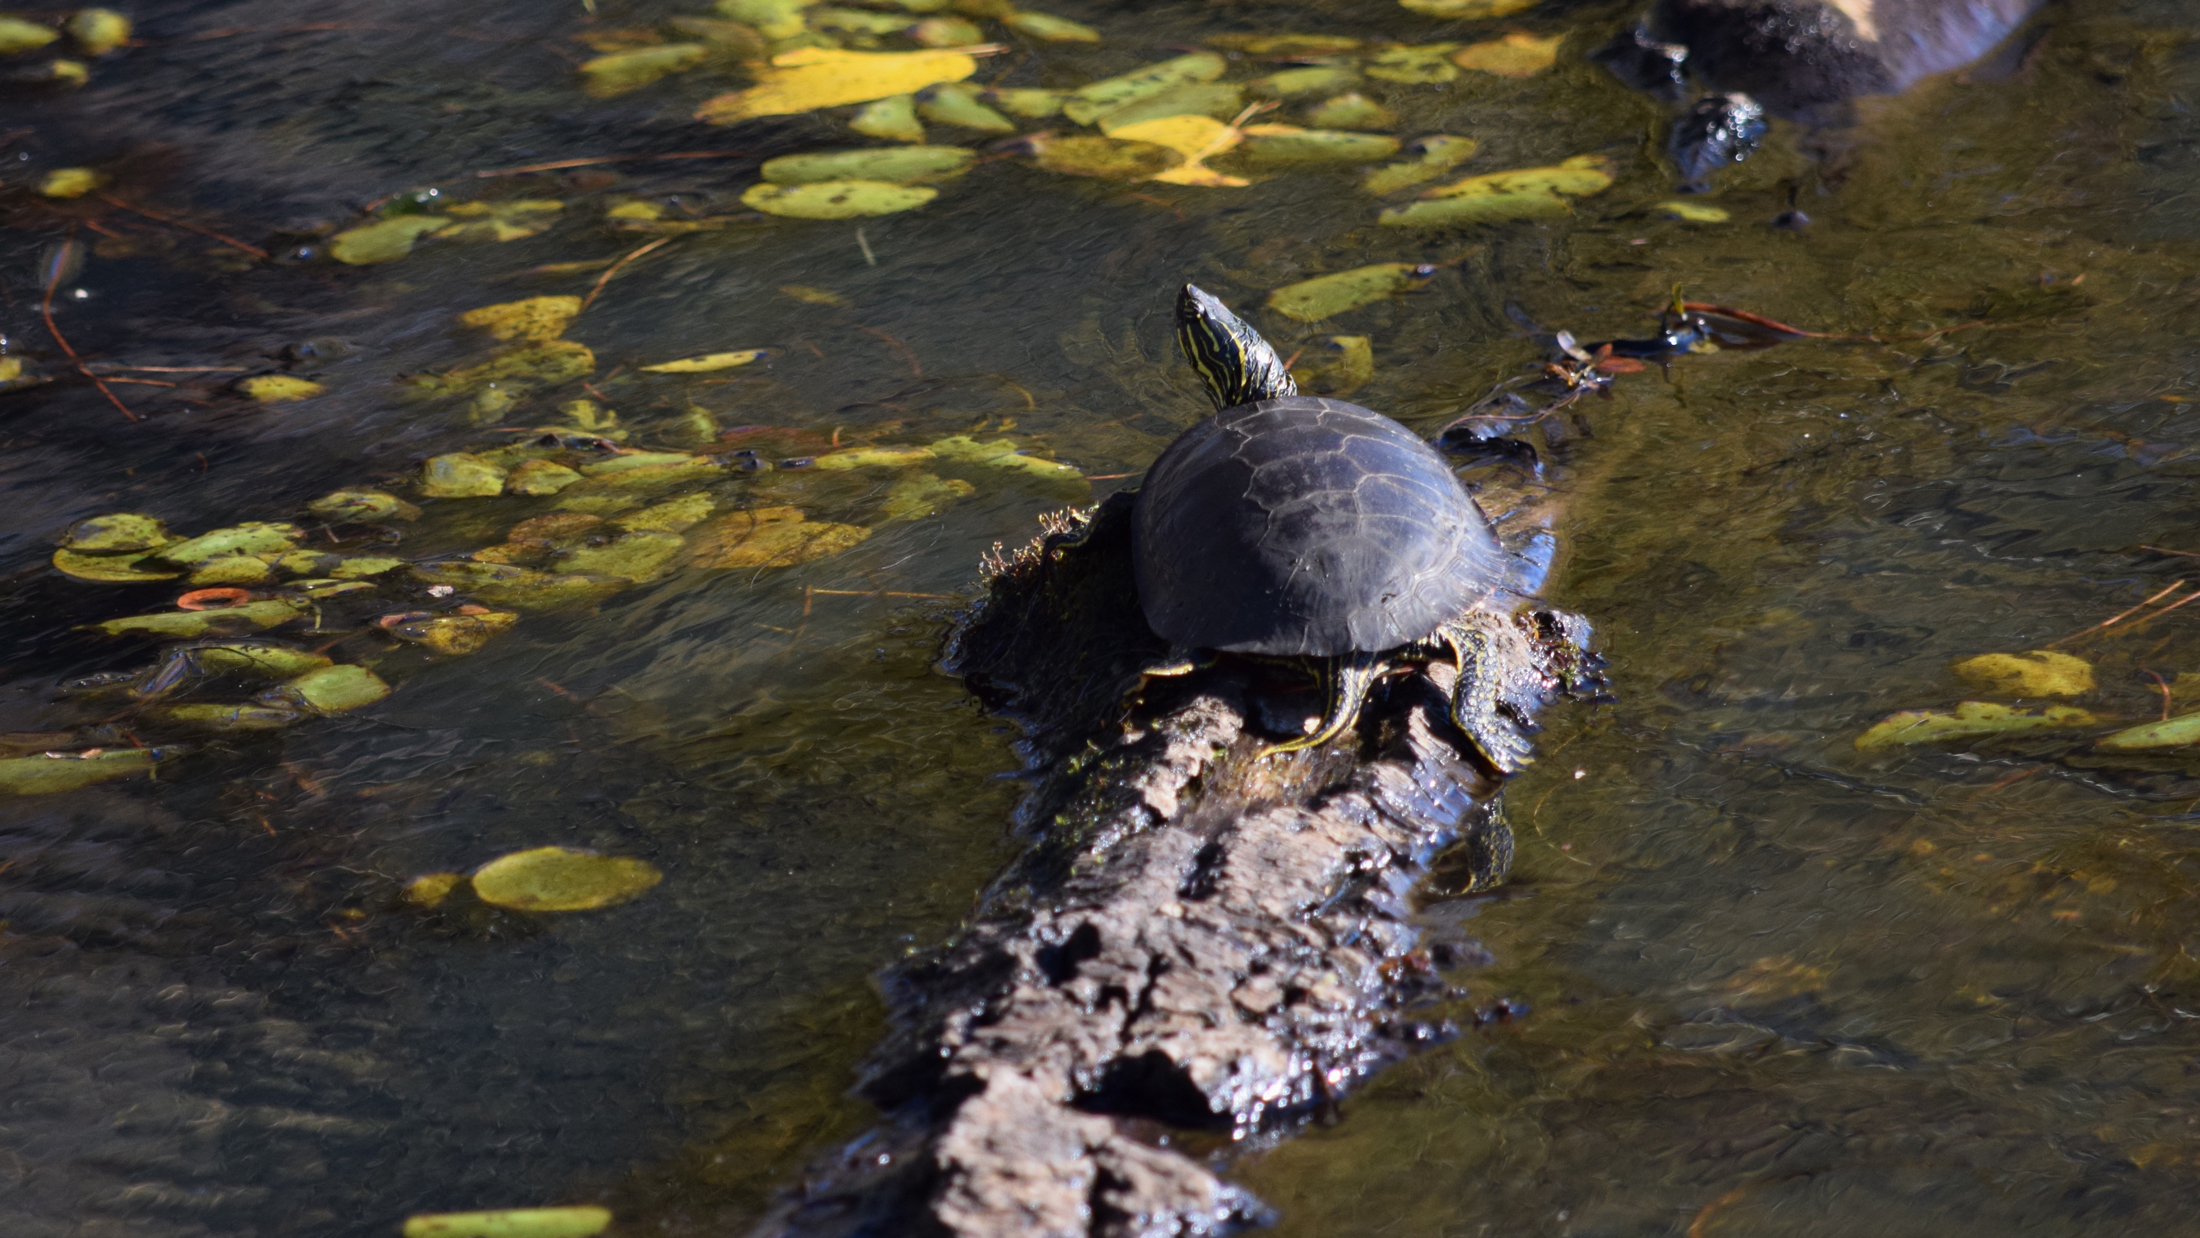 This painted turtle in the Portland, OR area was still active and basking in November. Timing of 